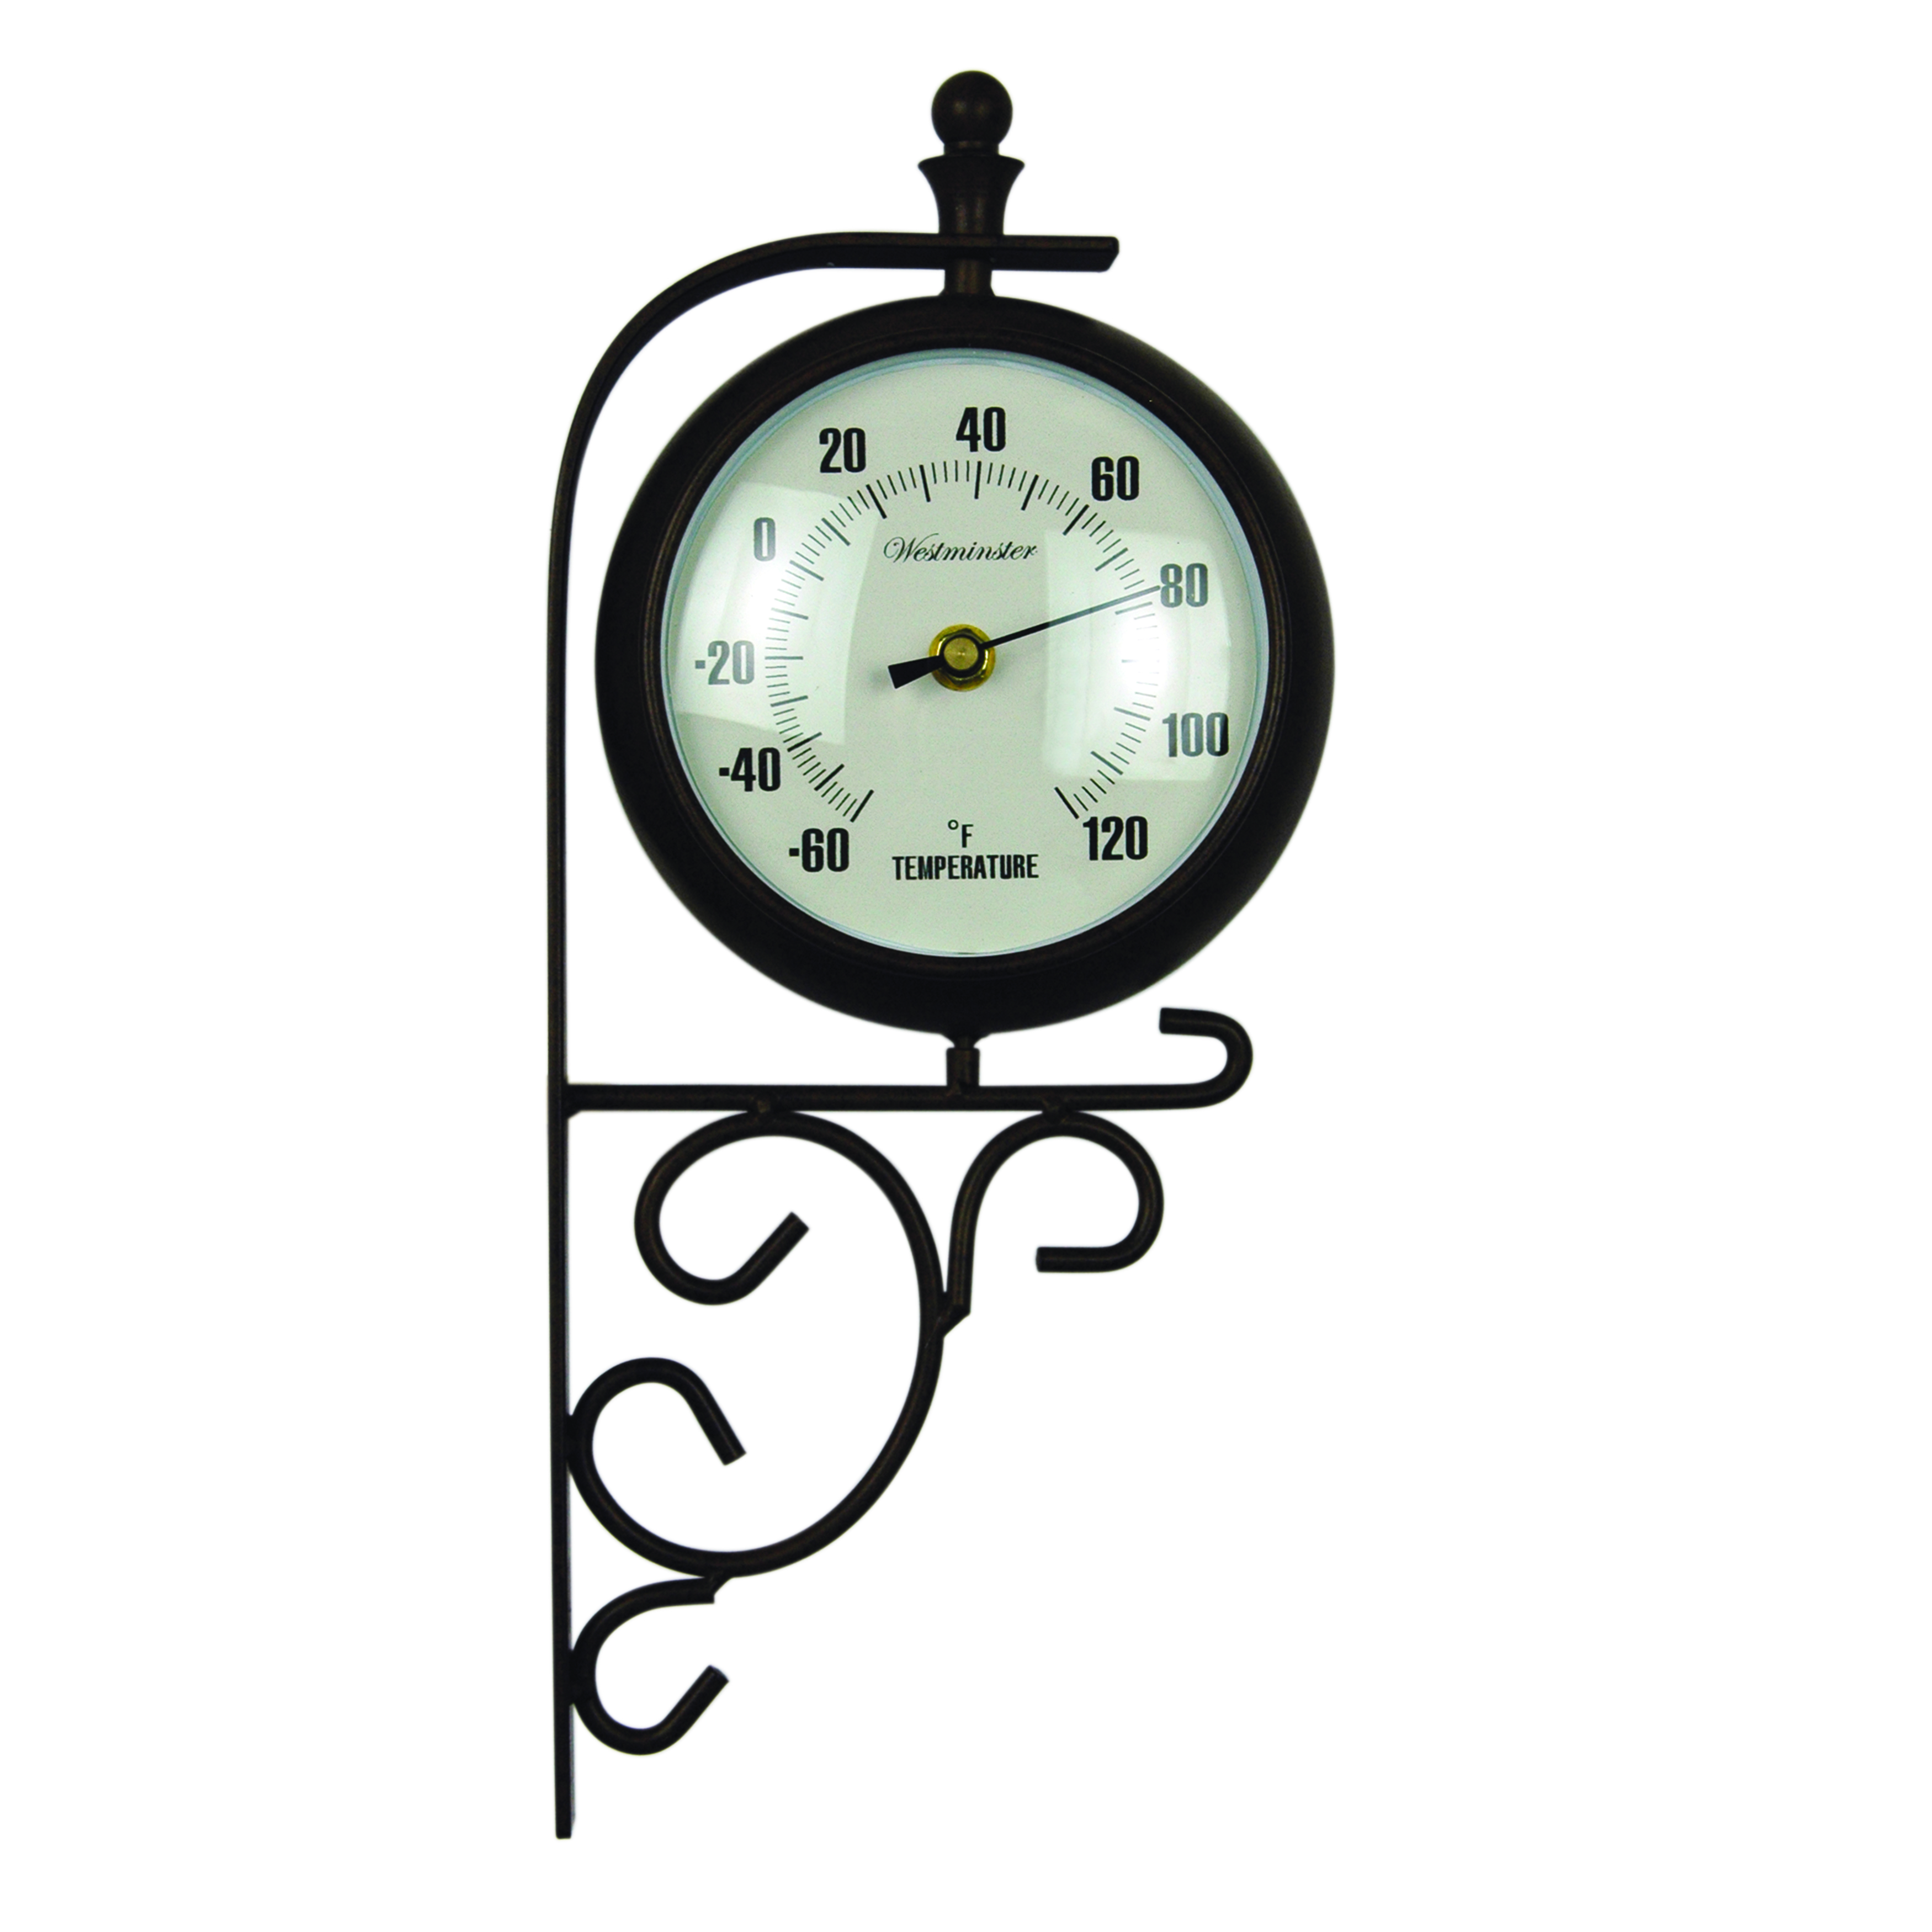 Luster Leaf Gardening Products - Outdoor Clocks / Thermometers